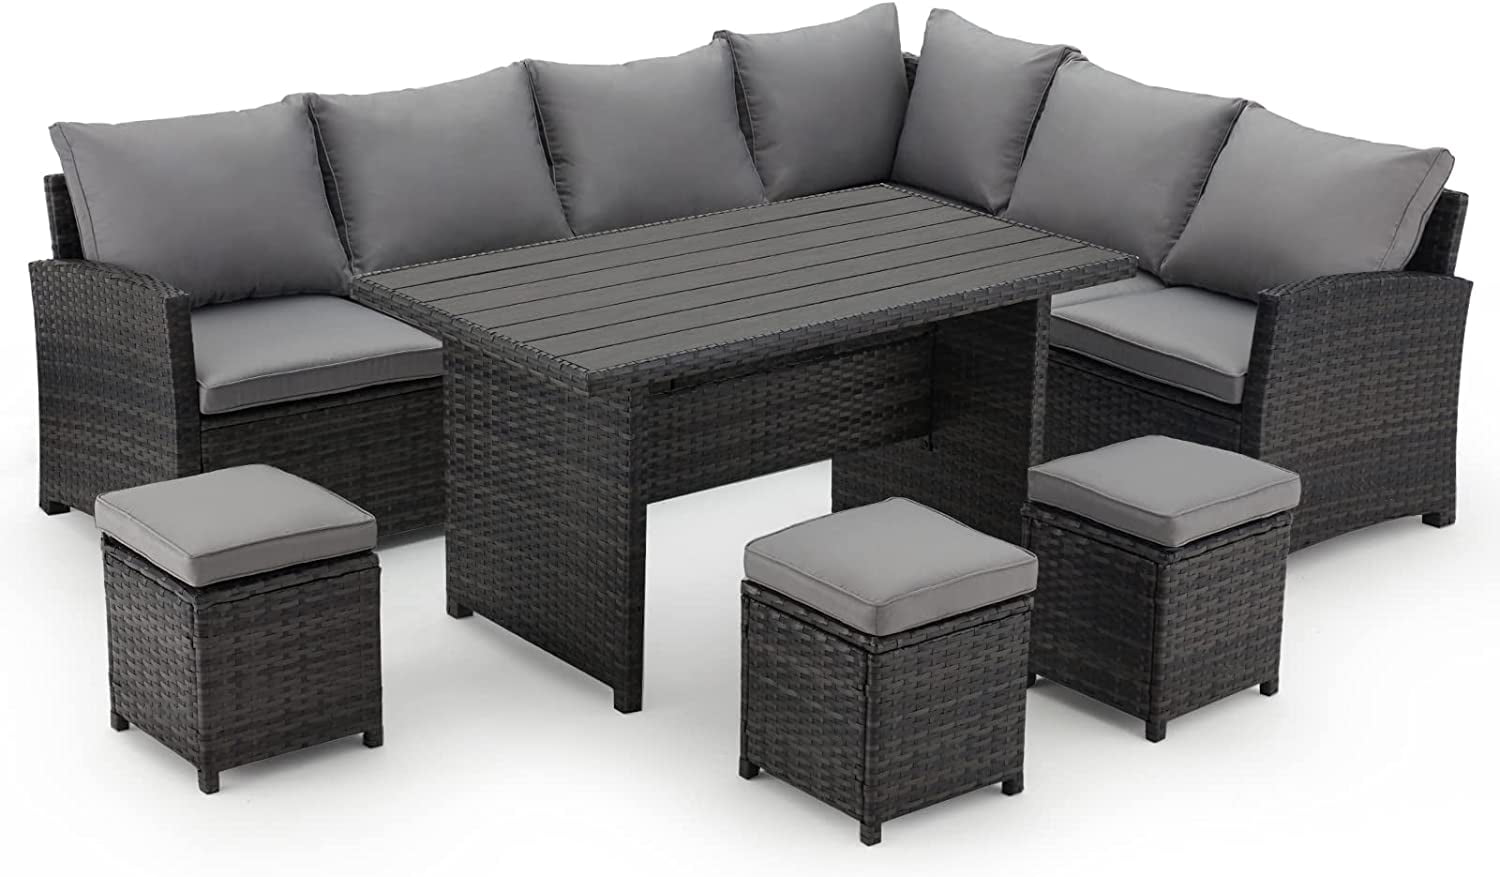 Black Wicker Patio Ottoman Sectional Outdoor Foot Stool Sofa Couch Furniture 